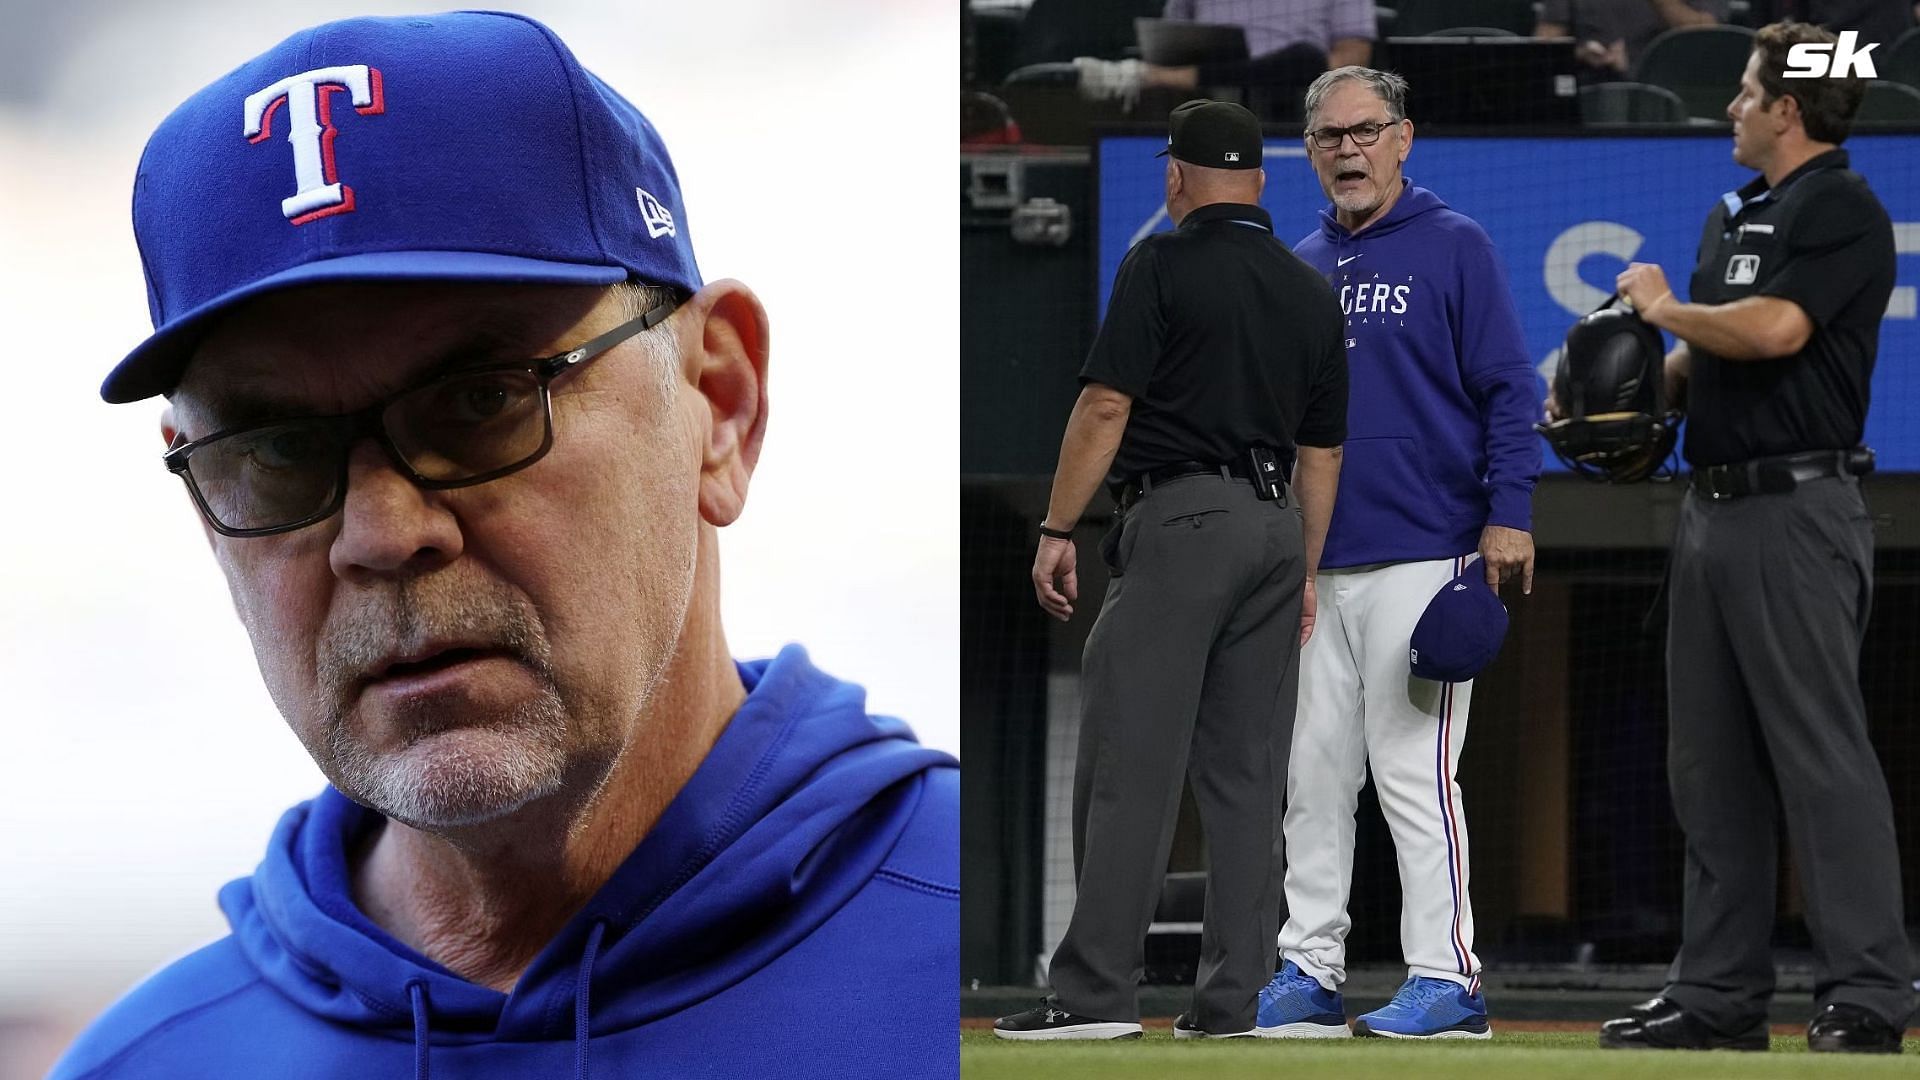 WATCH: Rangers manager Bruce Bochy ejected against Tigers following questionable umpire decision on foul ball